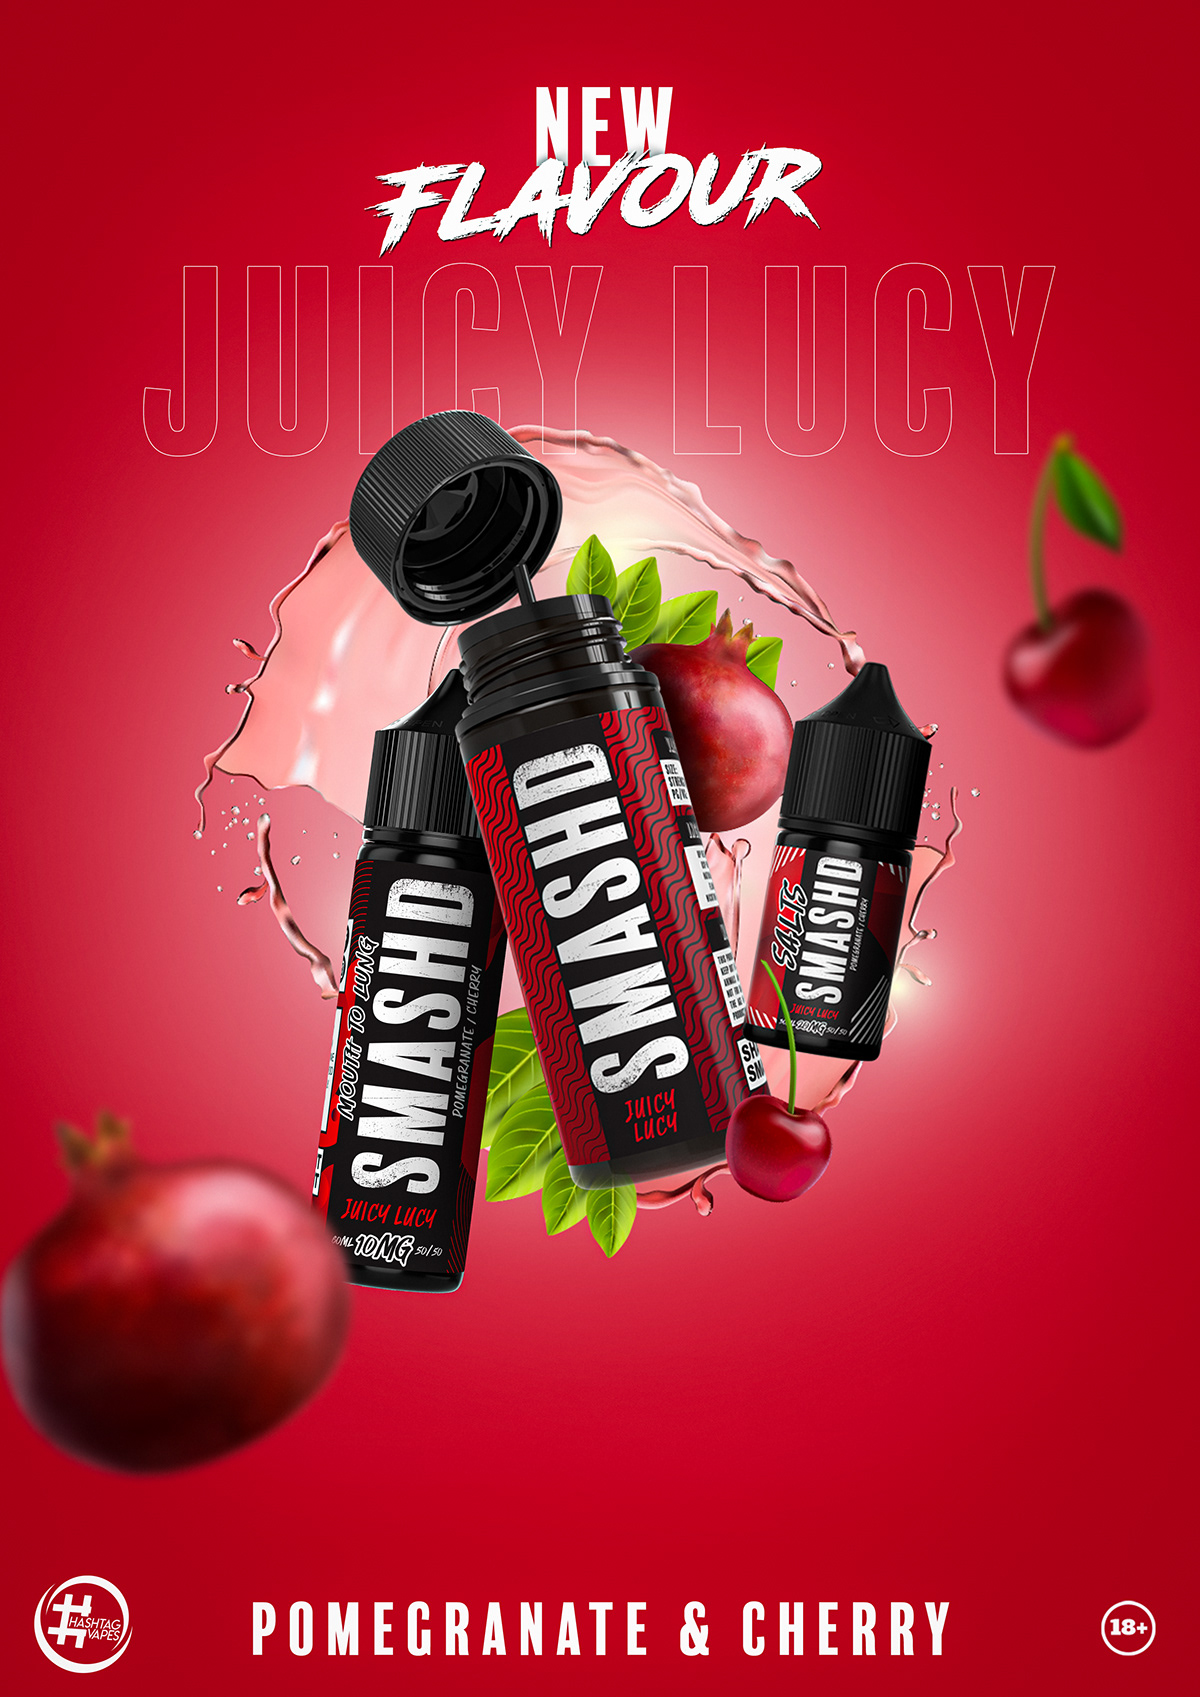 E-Liquid brand bringing you nothing other than damn good flavour.